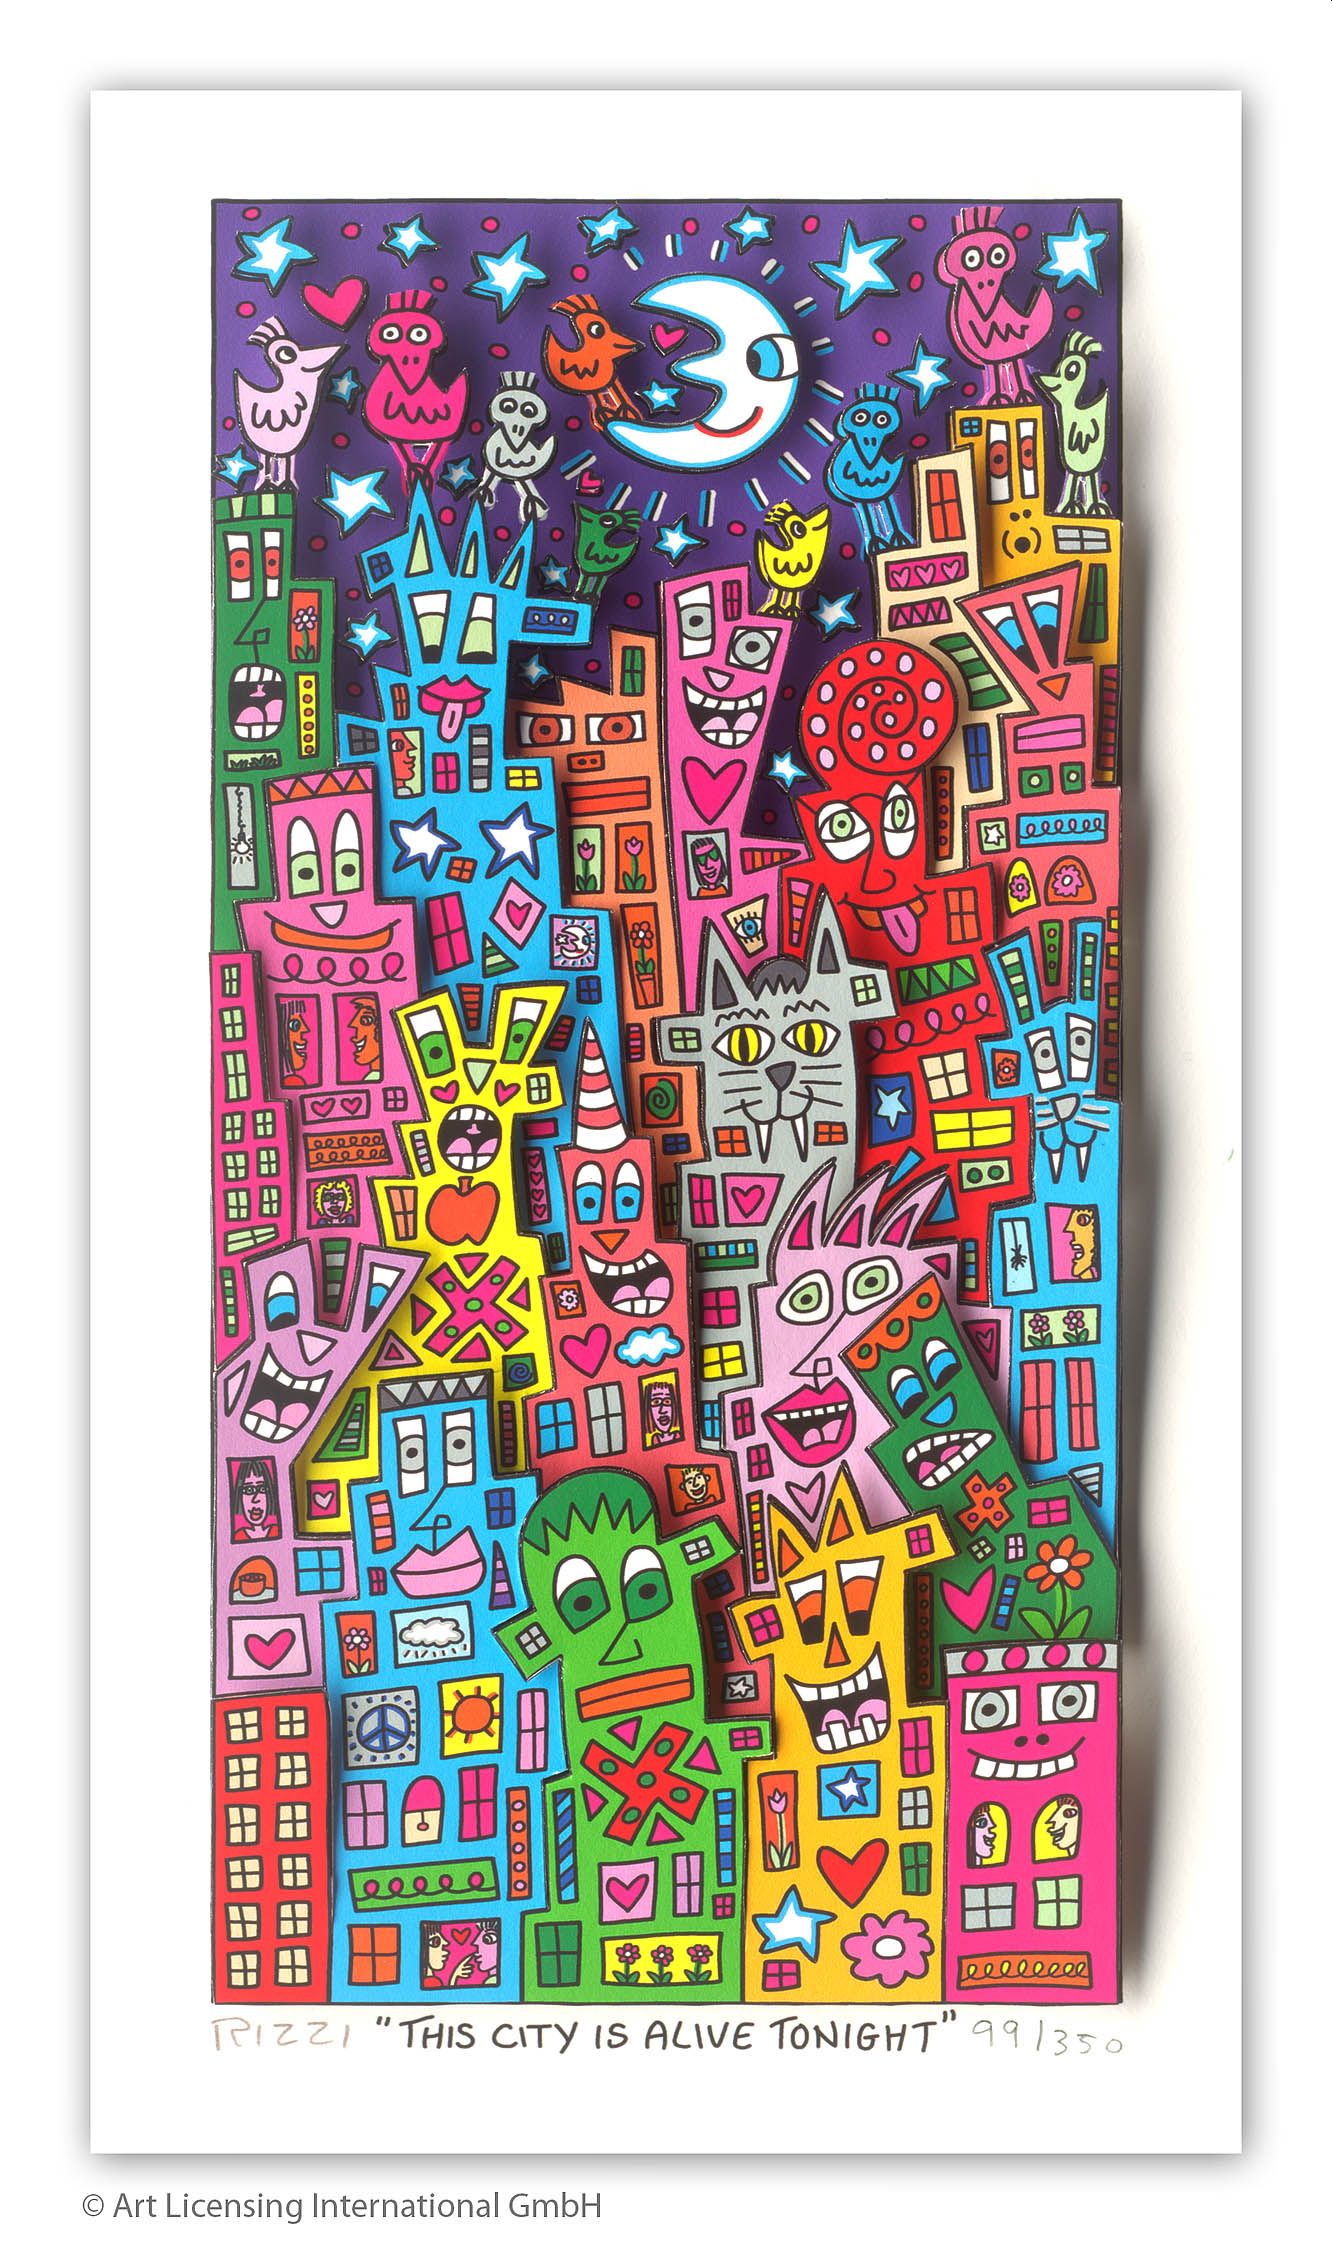 James Rizzi -This City is alive tonight